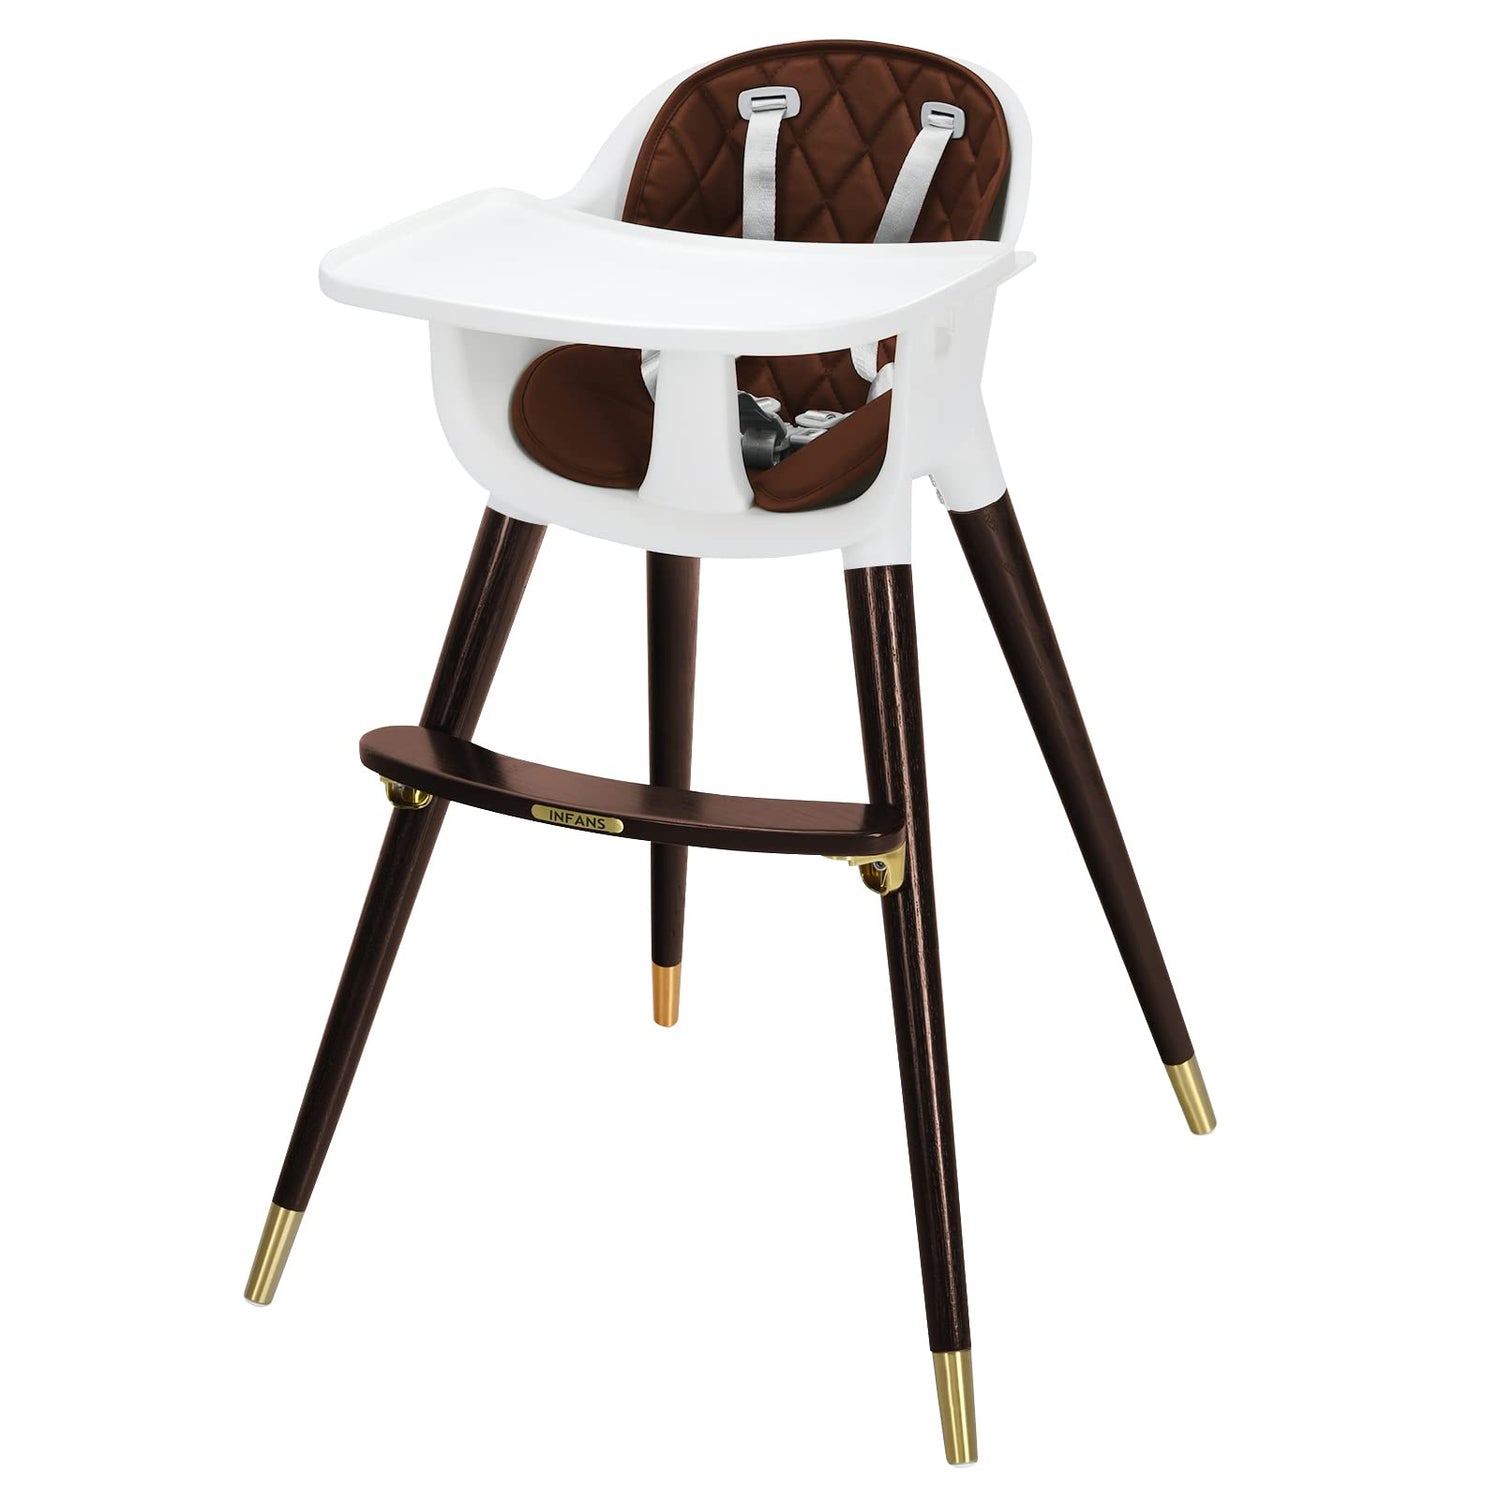 3 in 1 Wooden High Chair for Kids and Toddlers OLAKIDS